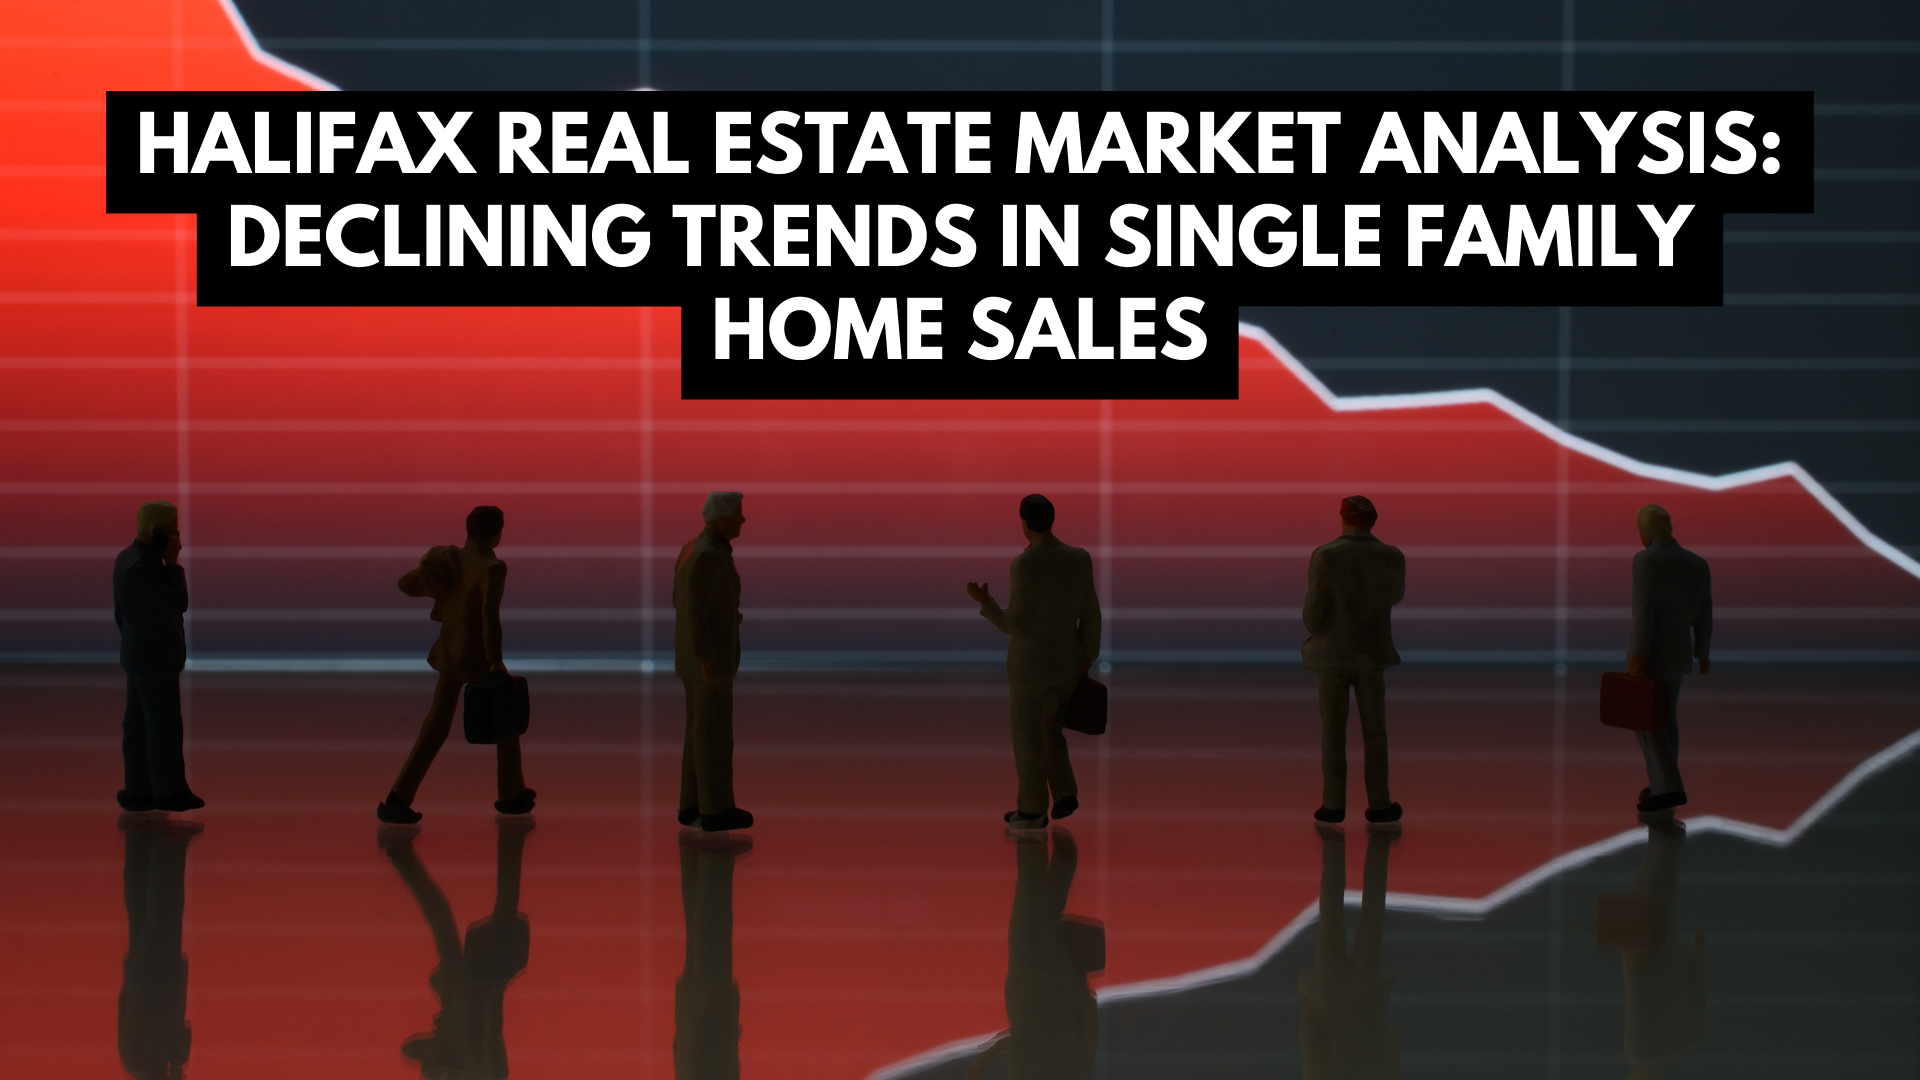 Halifax Real Estate Market Analysis: Declining Trends in Single Family Home Sales